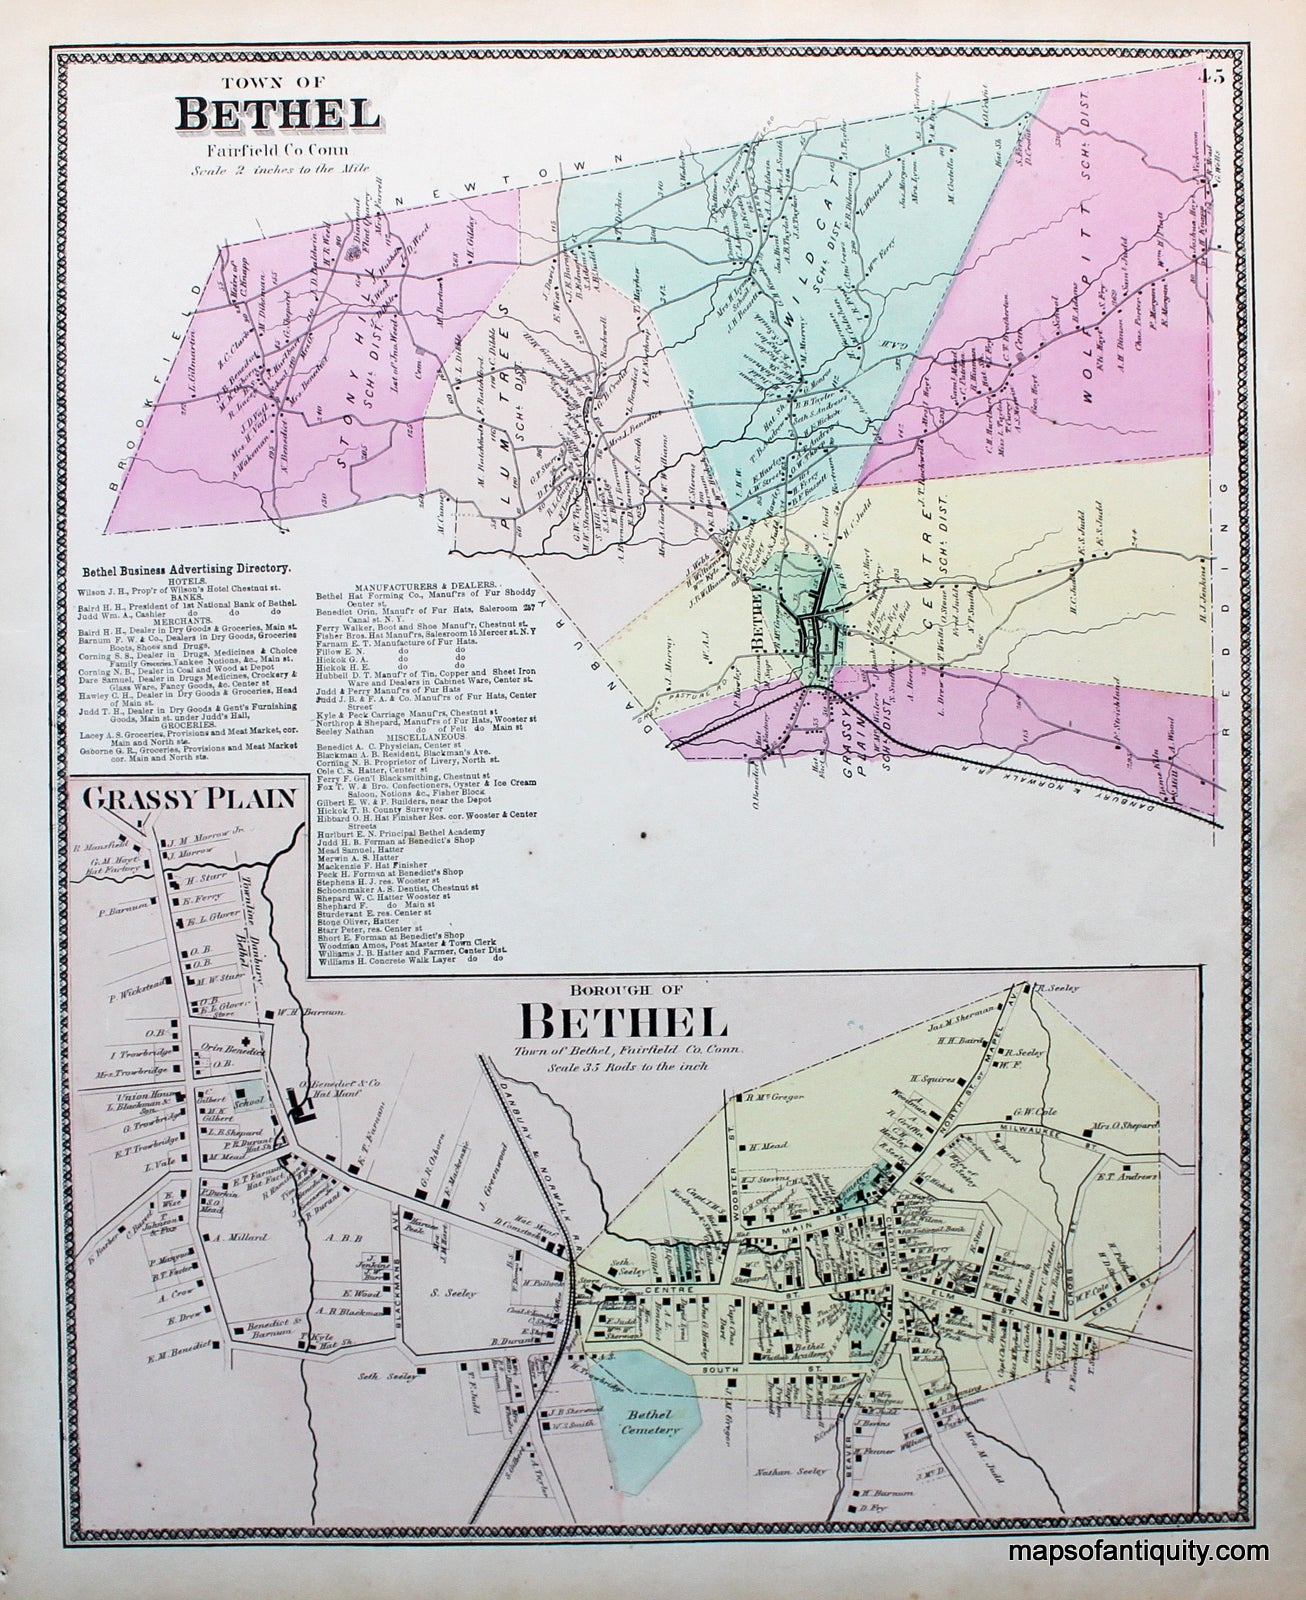 Antique-Hand-Colored-Map-Town-of-Bethel/Borough-of-Bethel-(CT)-United-States-Northeast-1867-Beers-Maps-Of-Antiquity